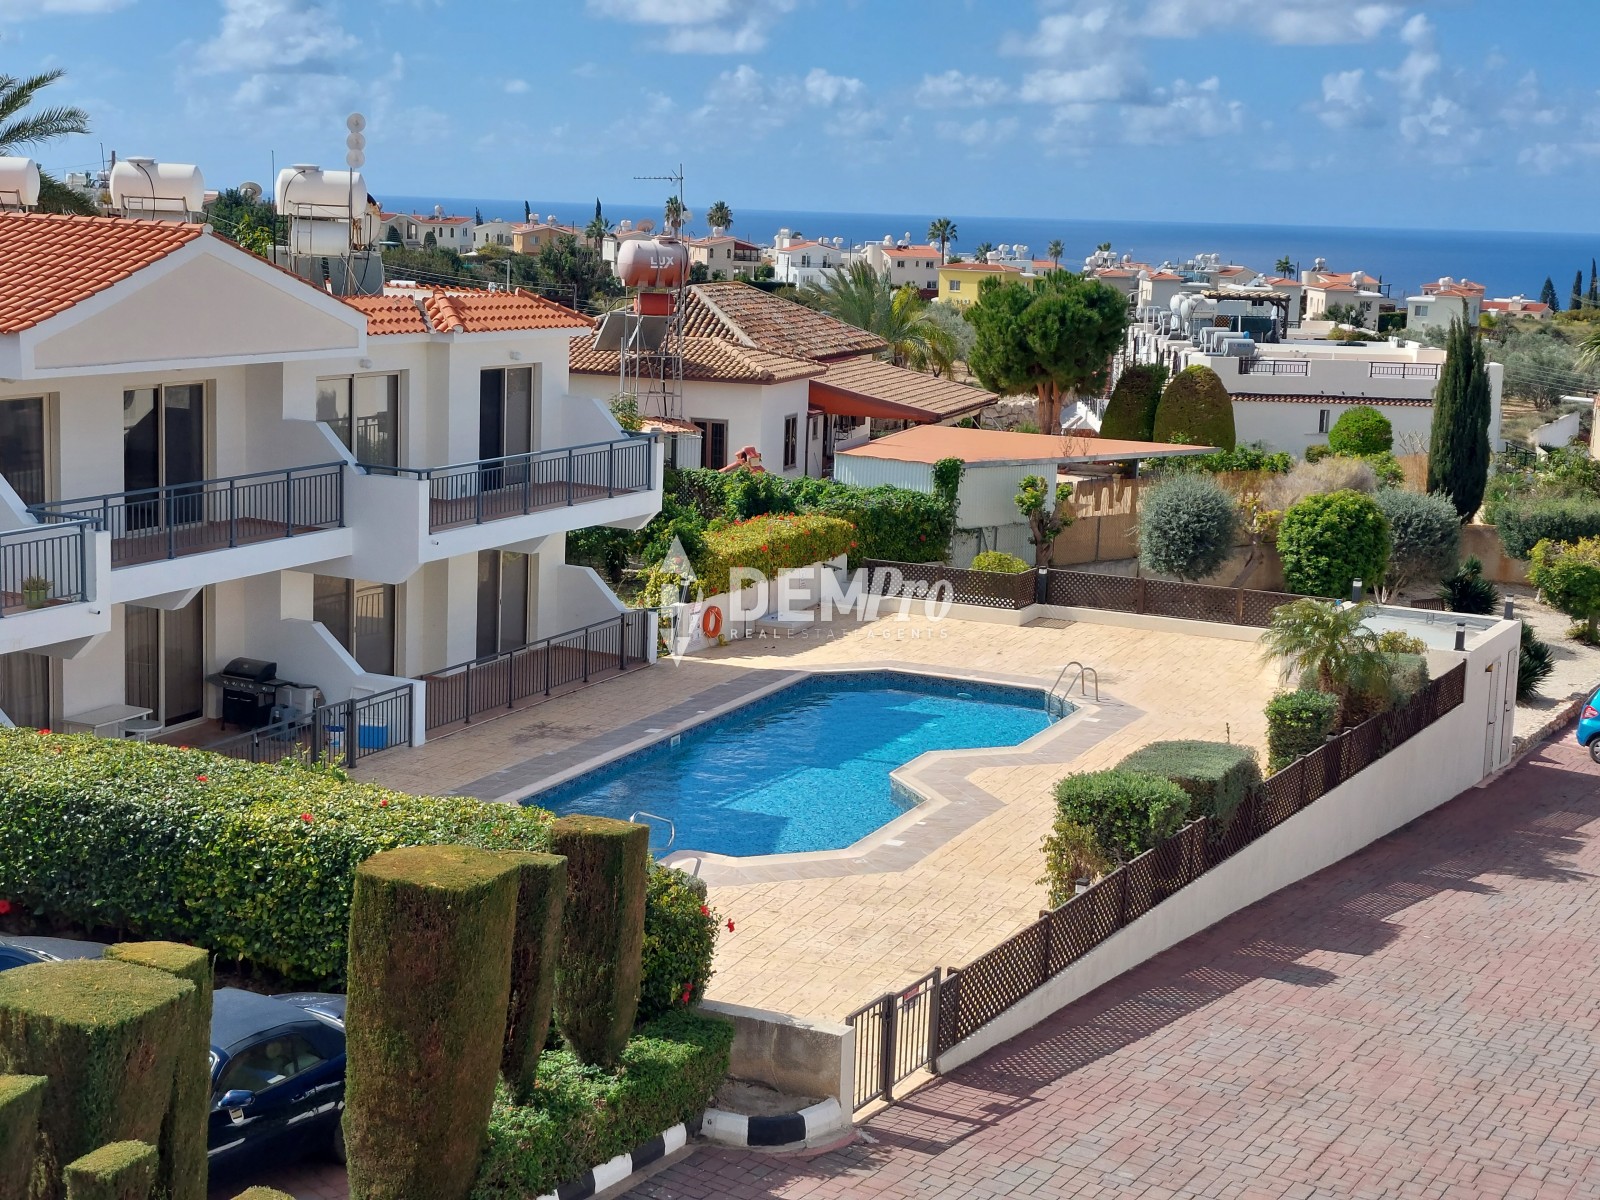 Apartment For Sale in Peyia, Paphos - DP3730